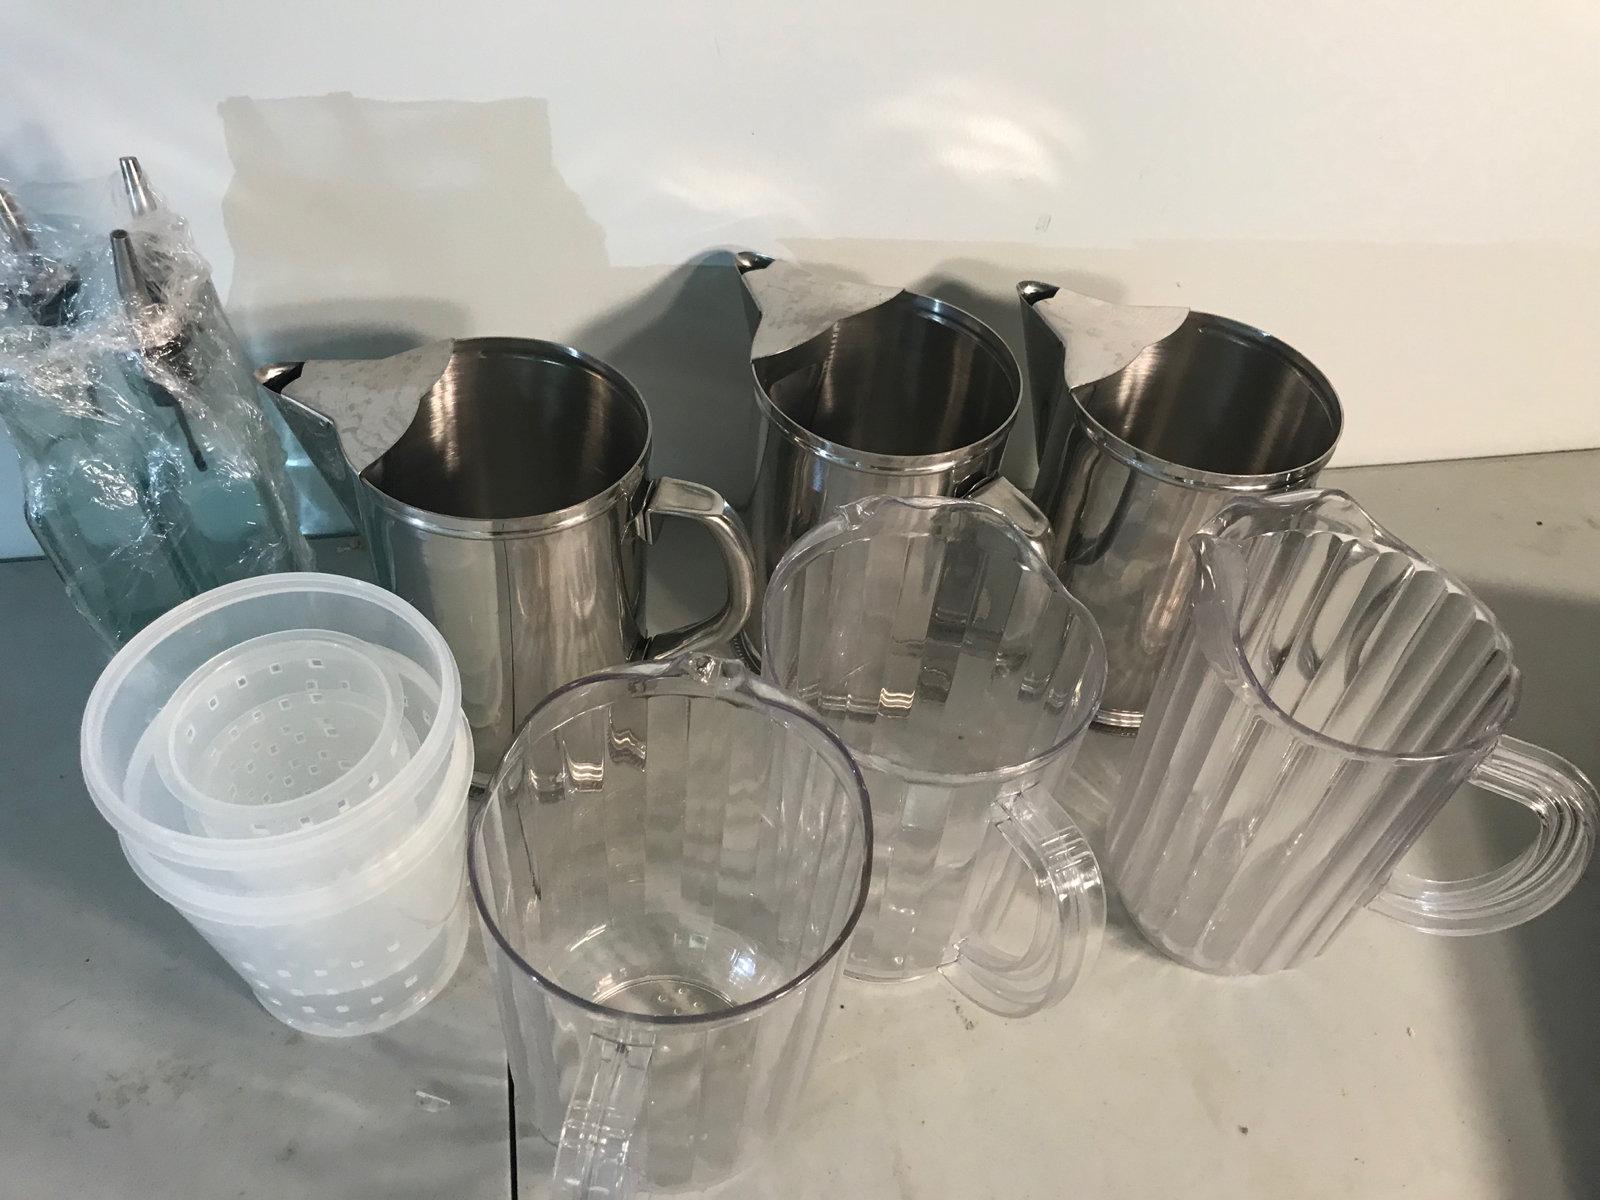 Stainless and plastic pitchers